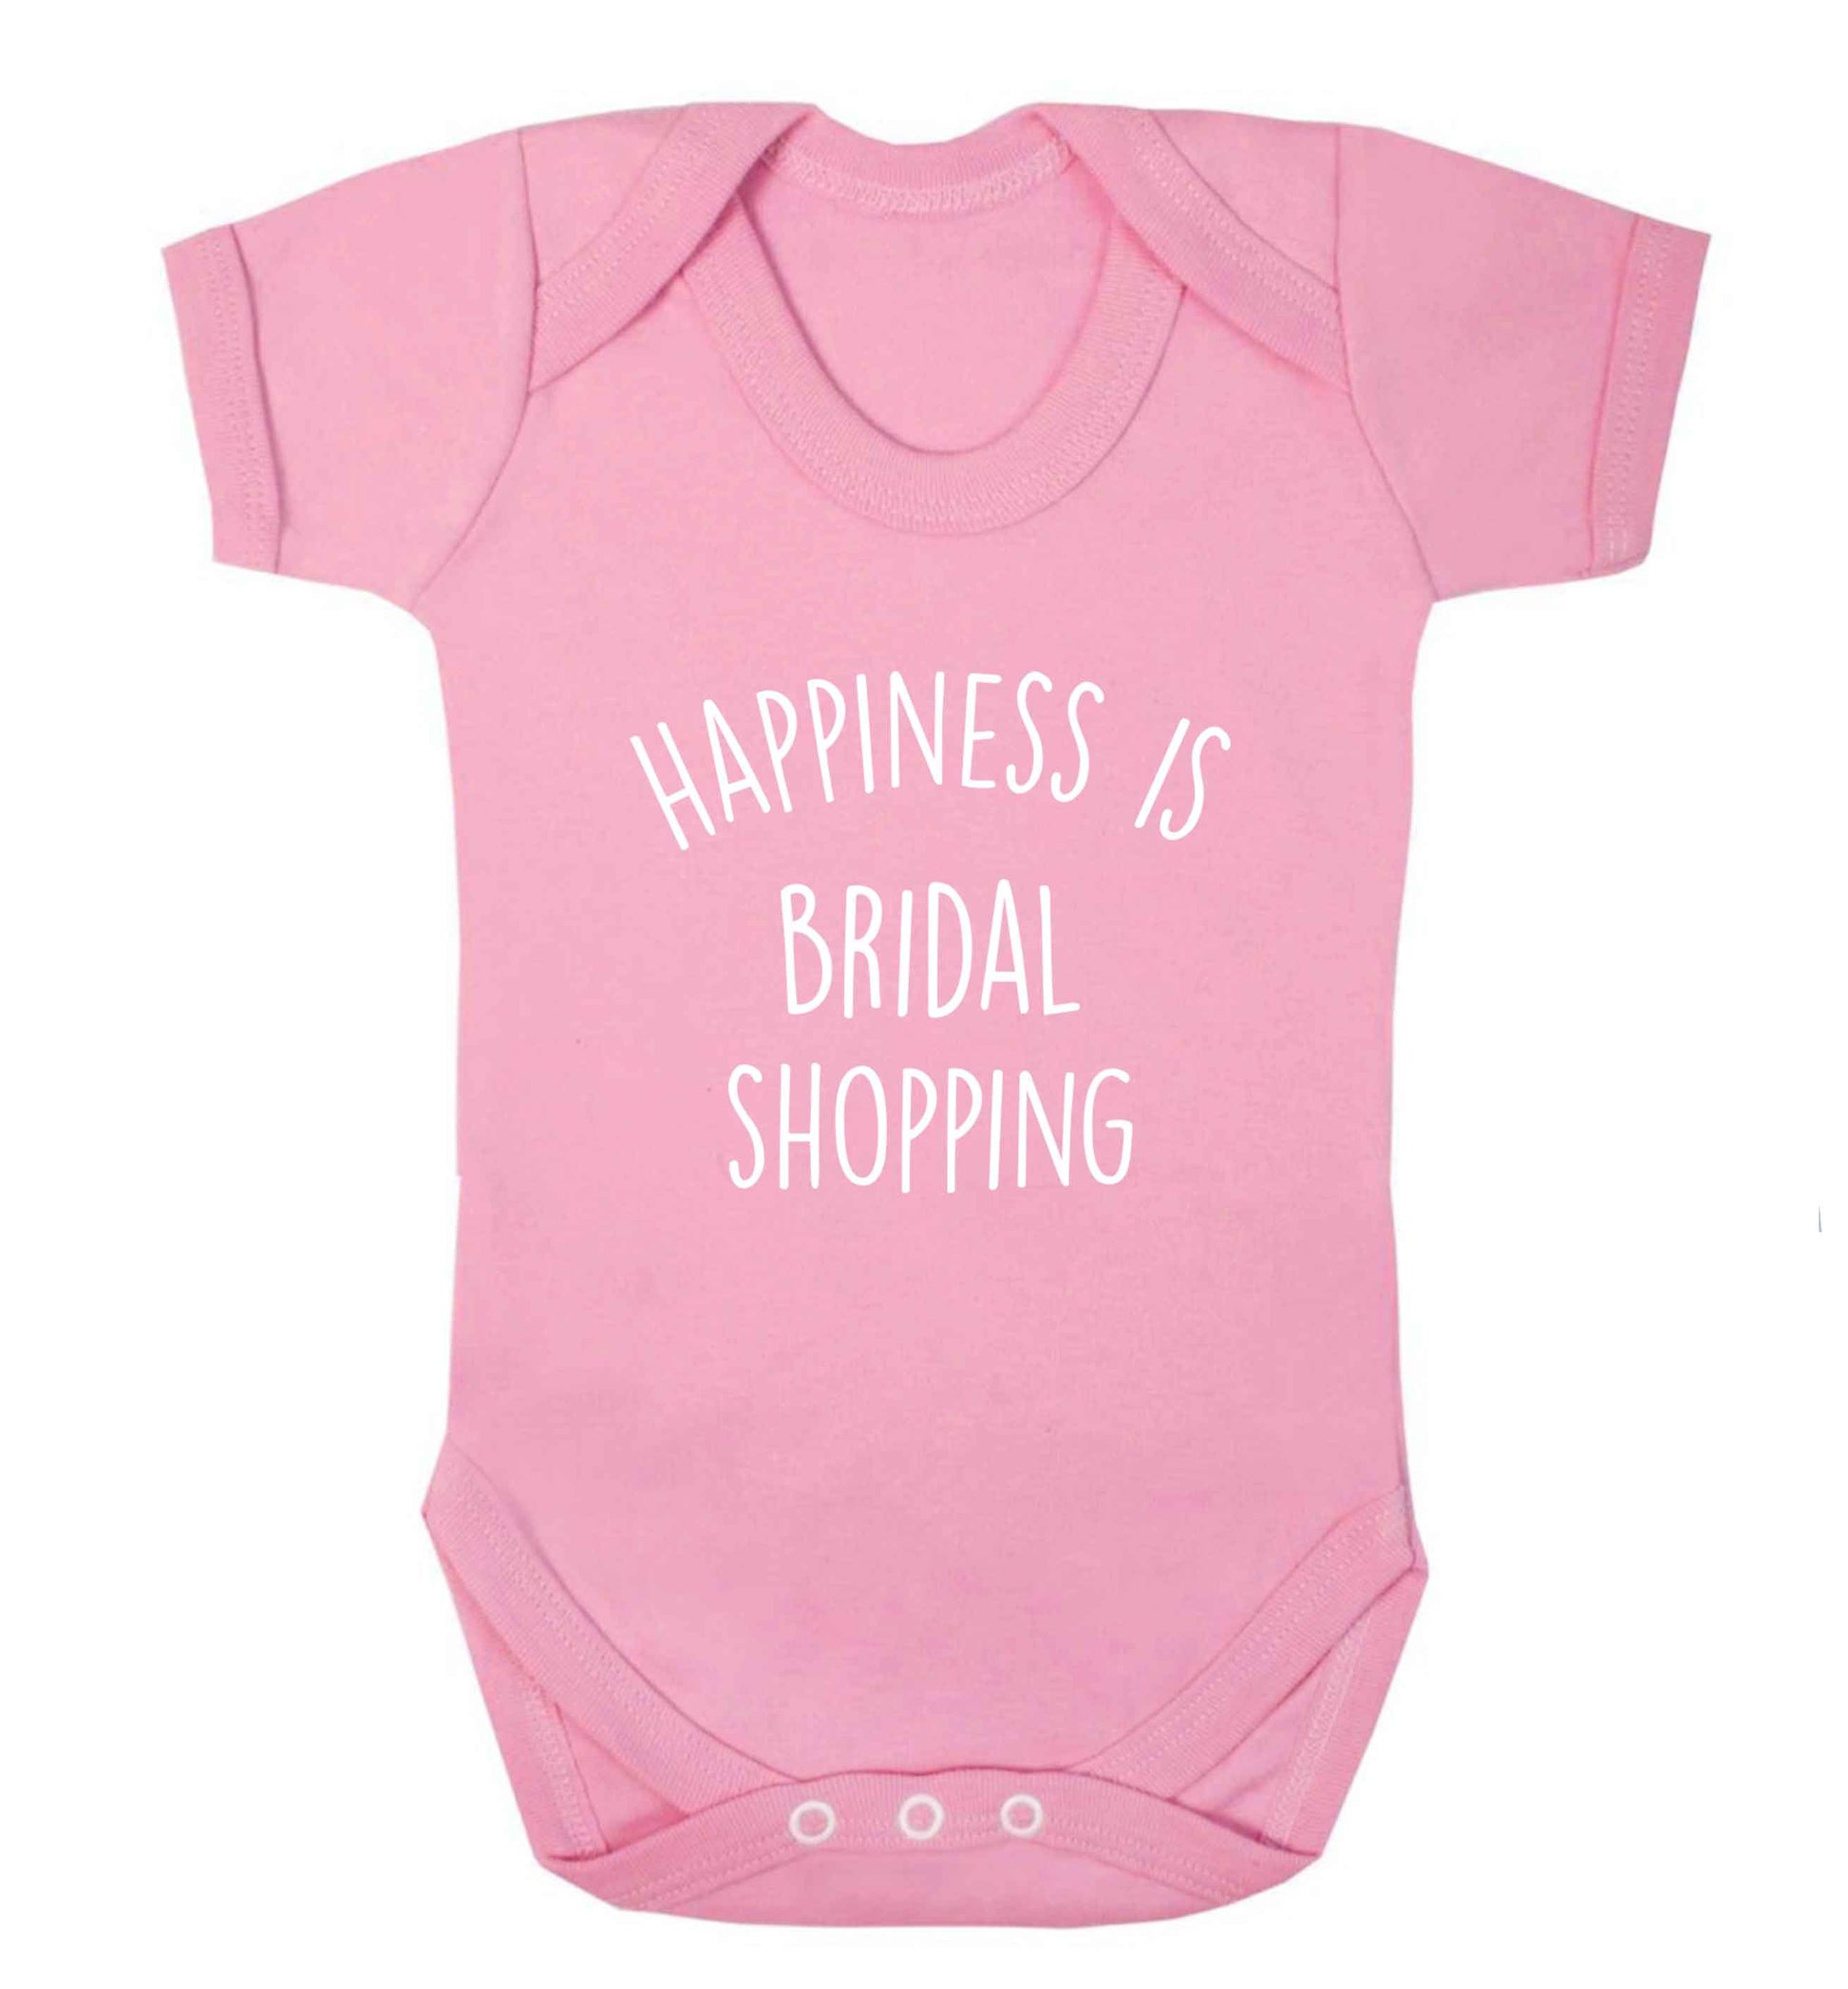 Happiness is bridal shopping baby vest pale pink 18-24 months